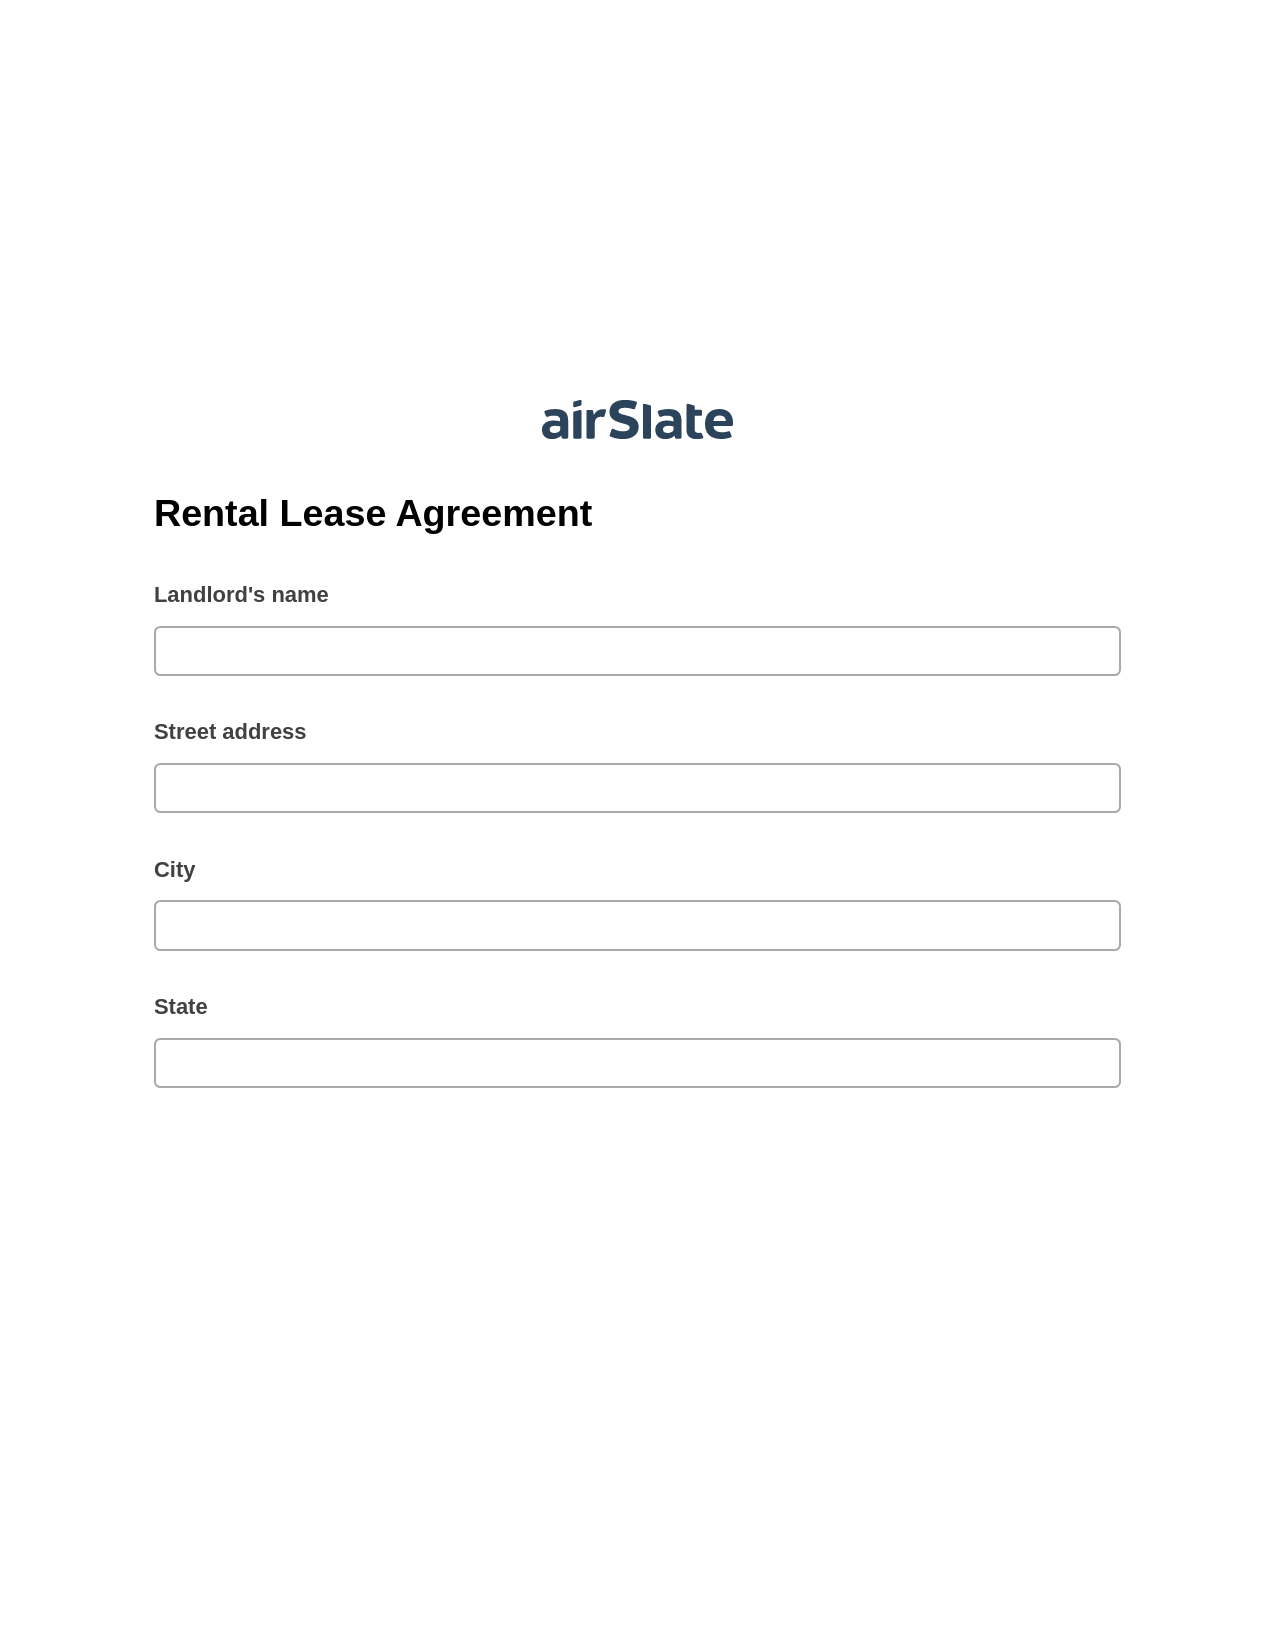 Multirole Rental Lease Agreement Pre-fill from MySQL Dropdown Options Bot, Add Tags to Slate Bot, Export to Smartsheet